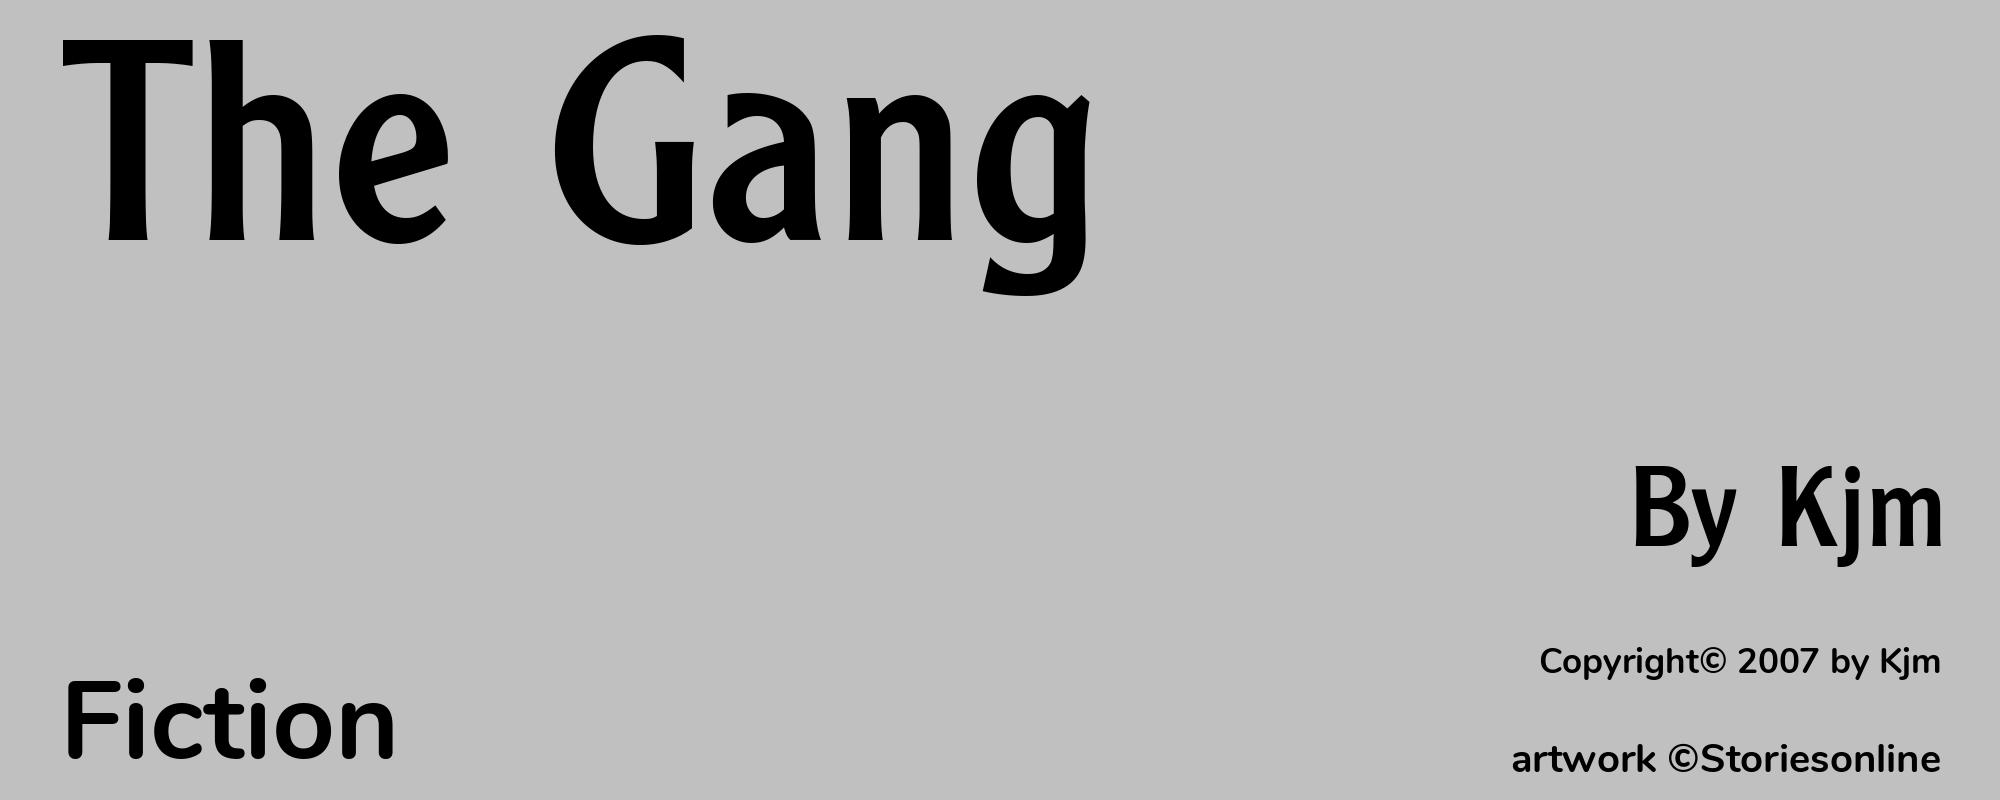 The Gang - Cover